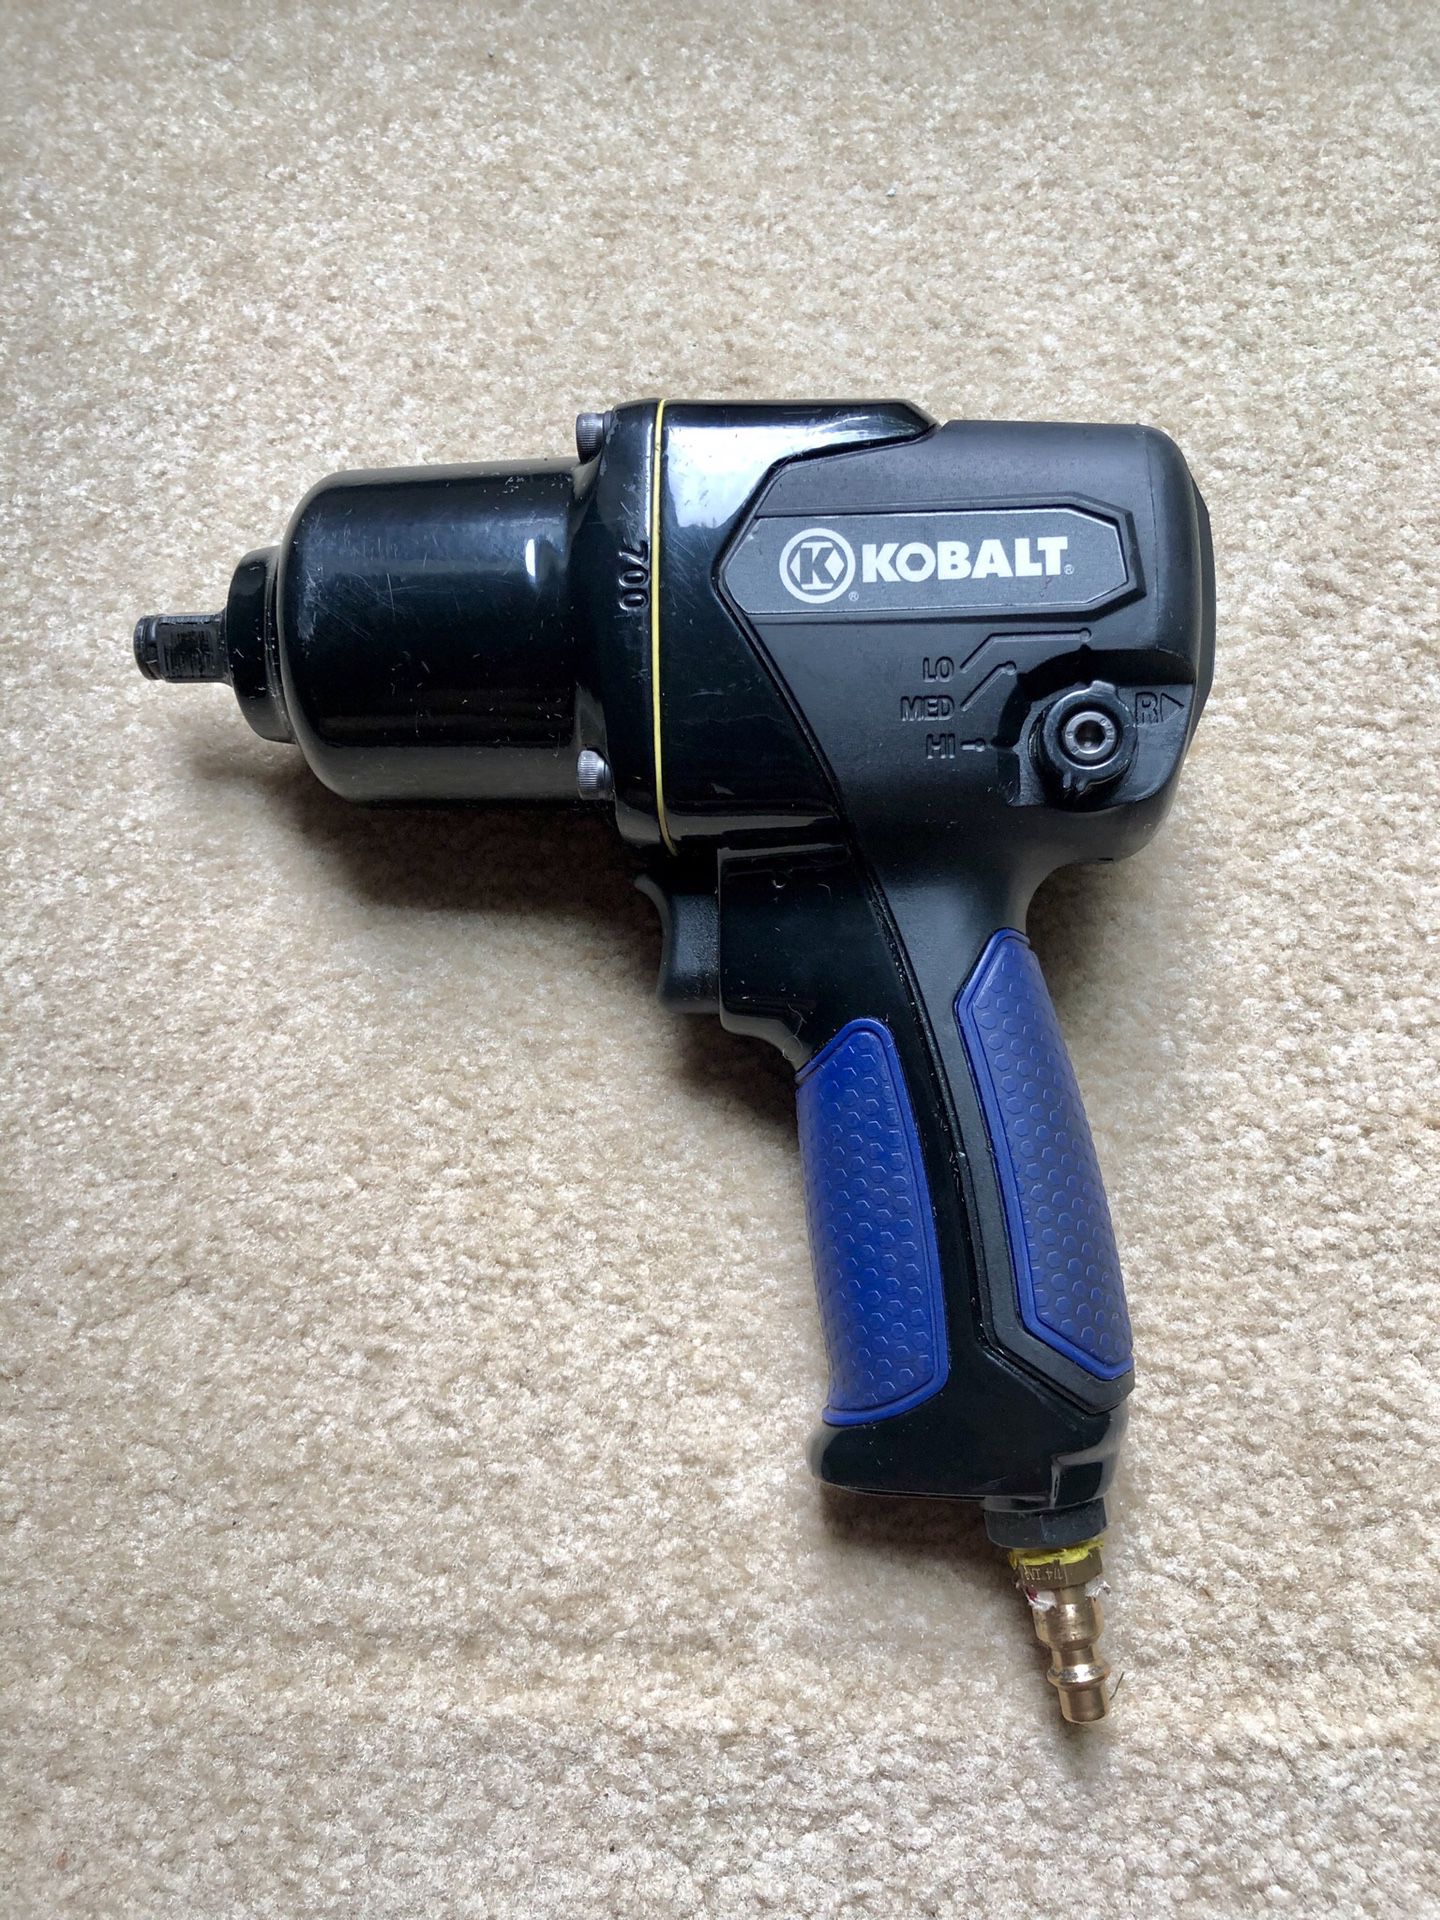 Kobalt 1/2 in 700 ft-lbs Air Impact Wrench